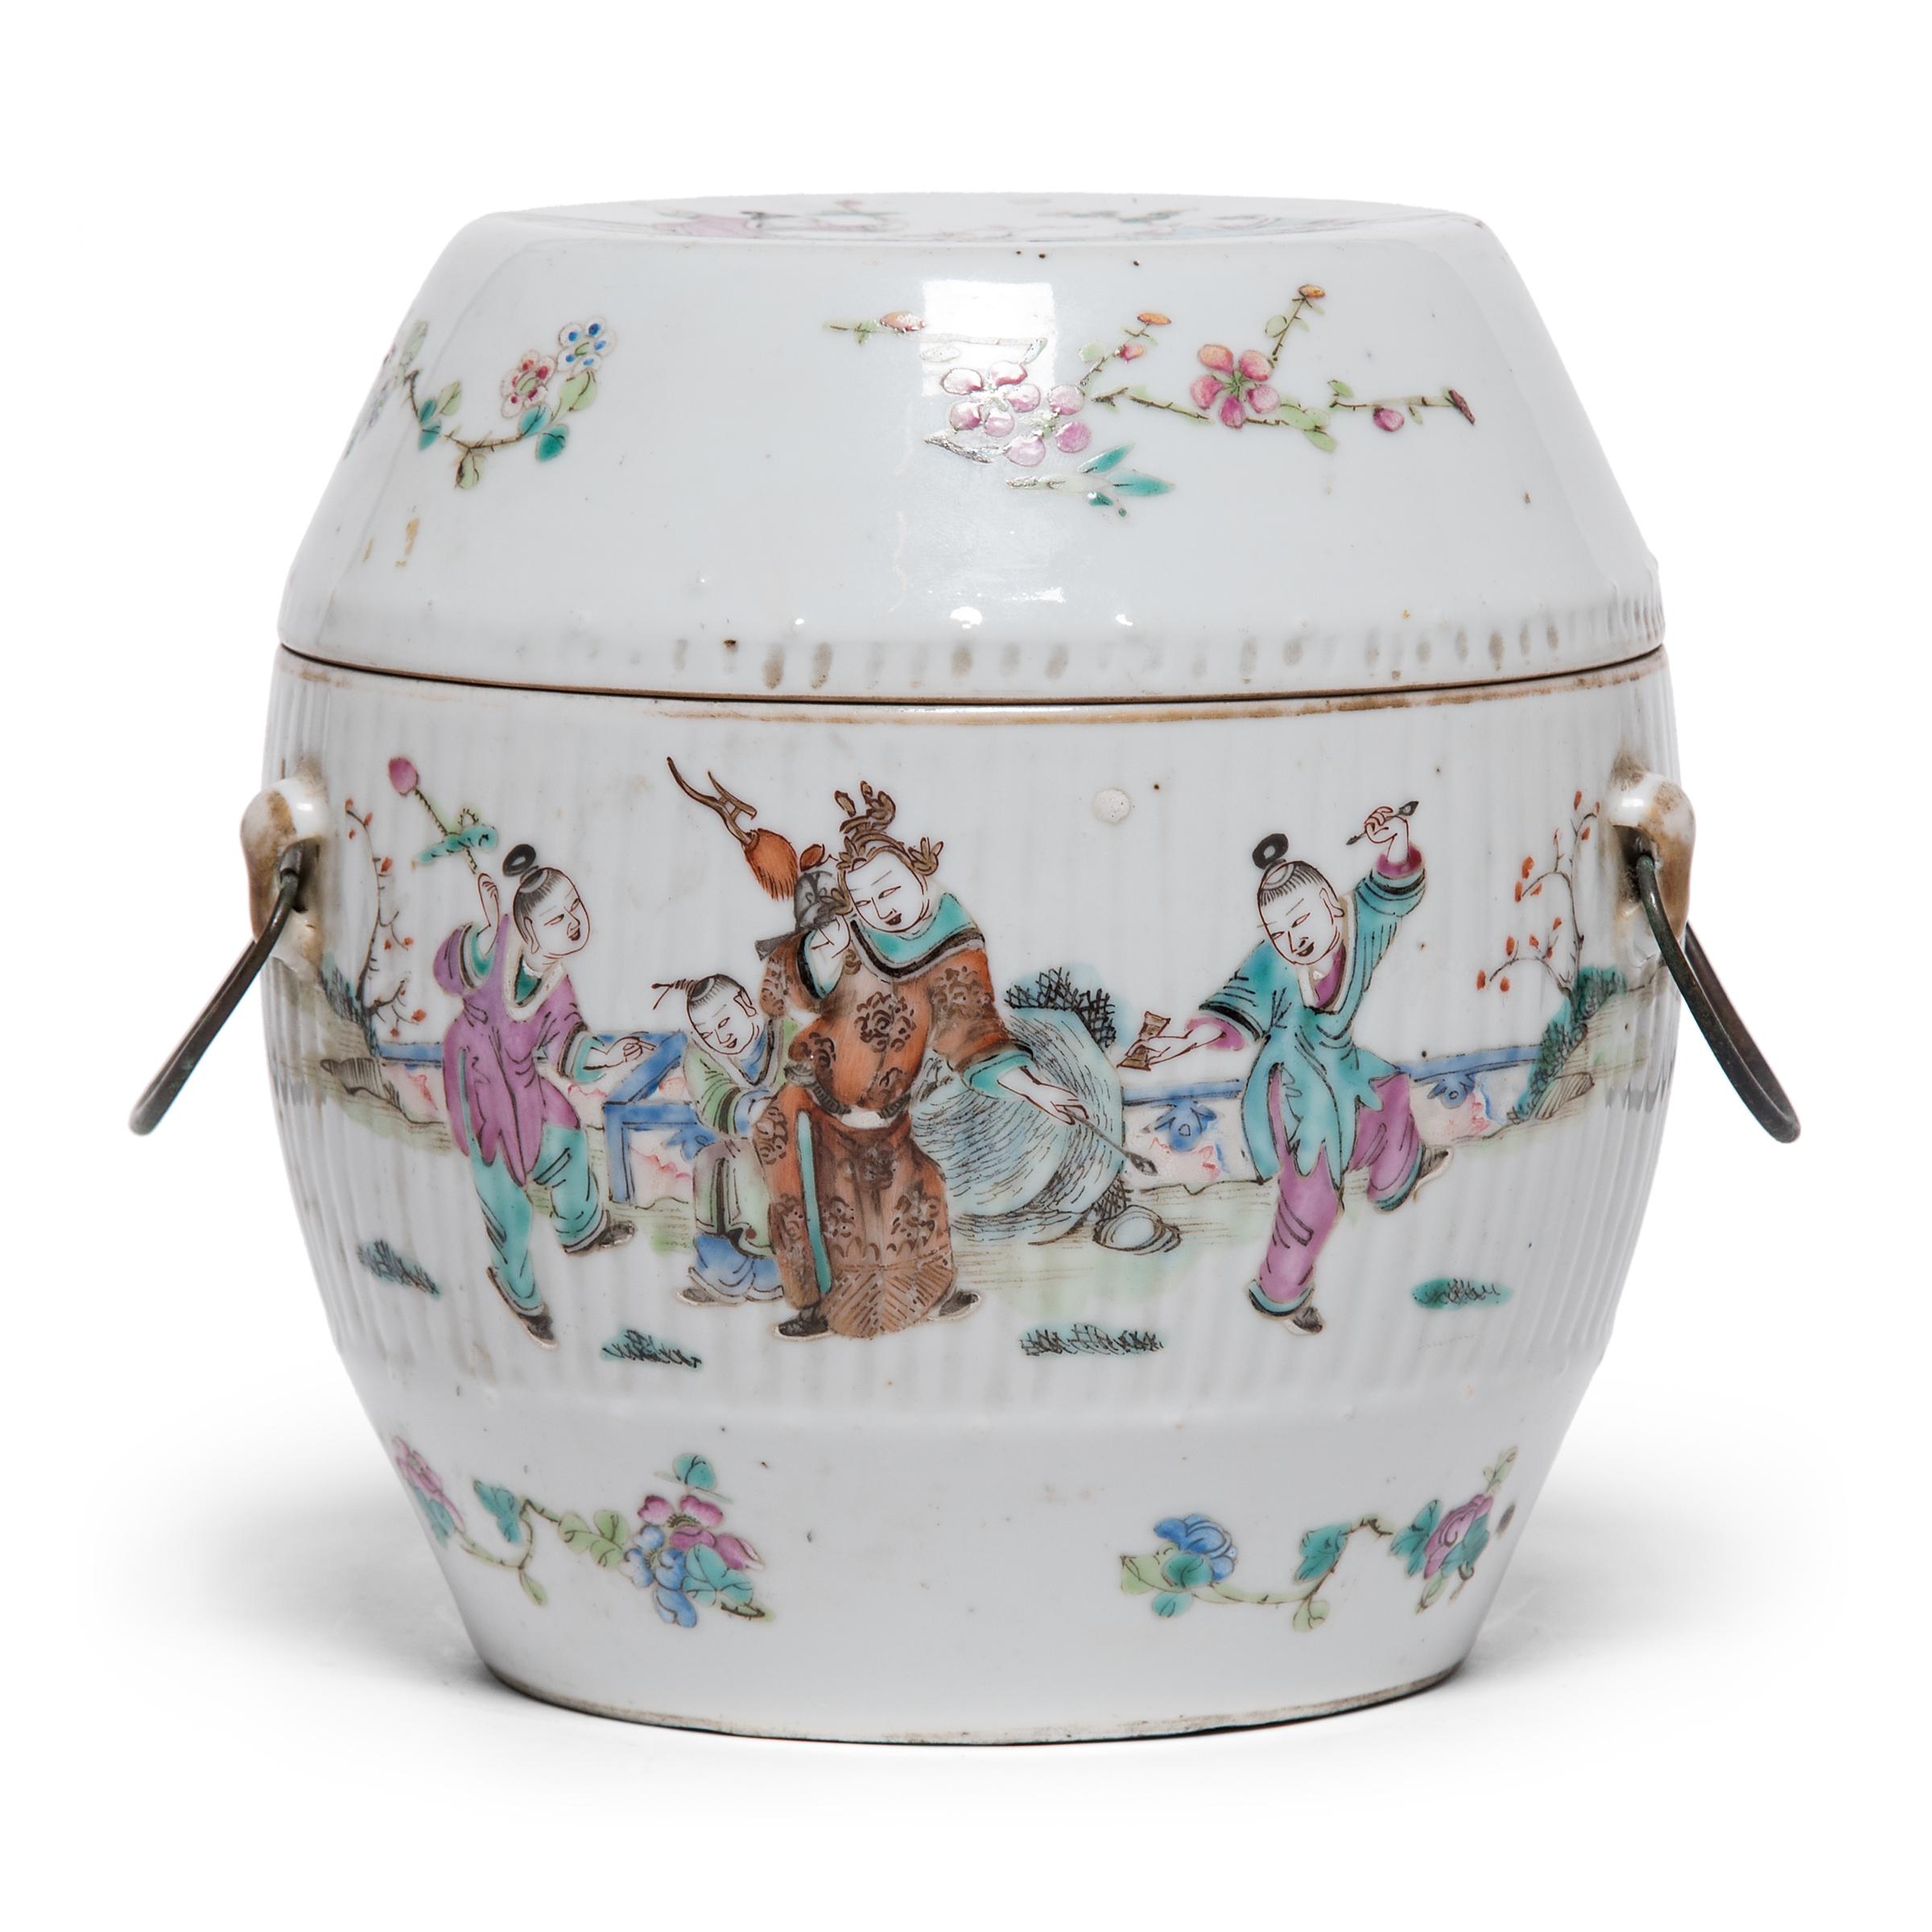 Chinese Export Chinese Famille Rose Soup Tureen with Children in Garden, c. 1900